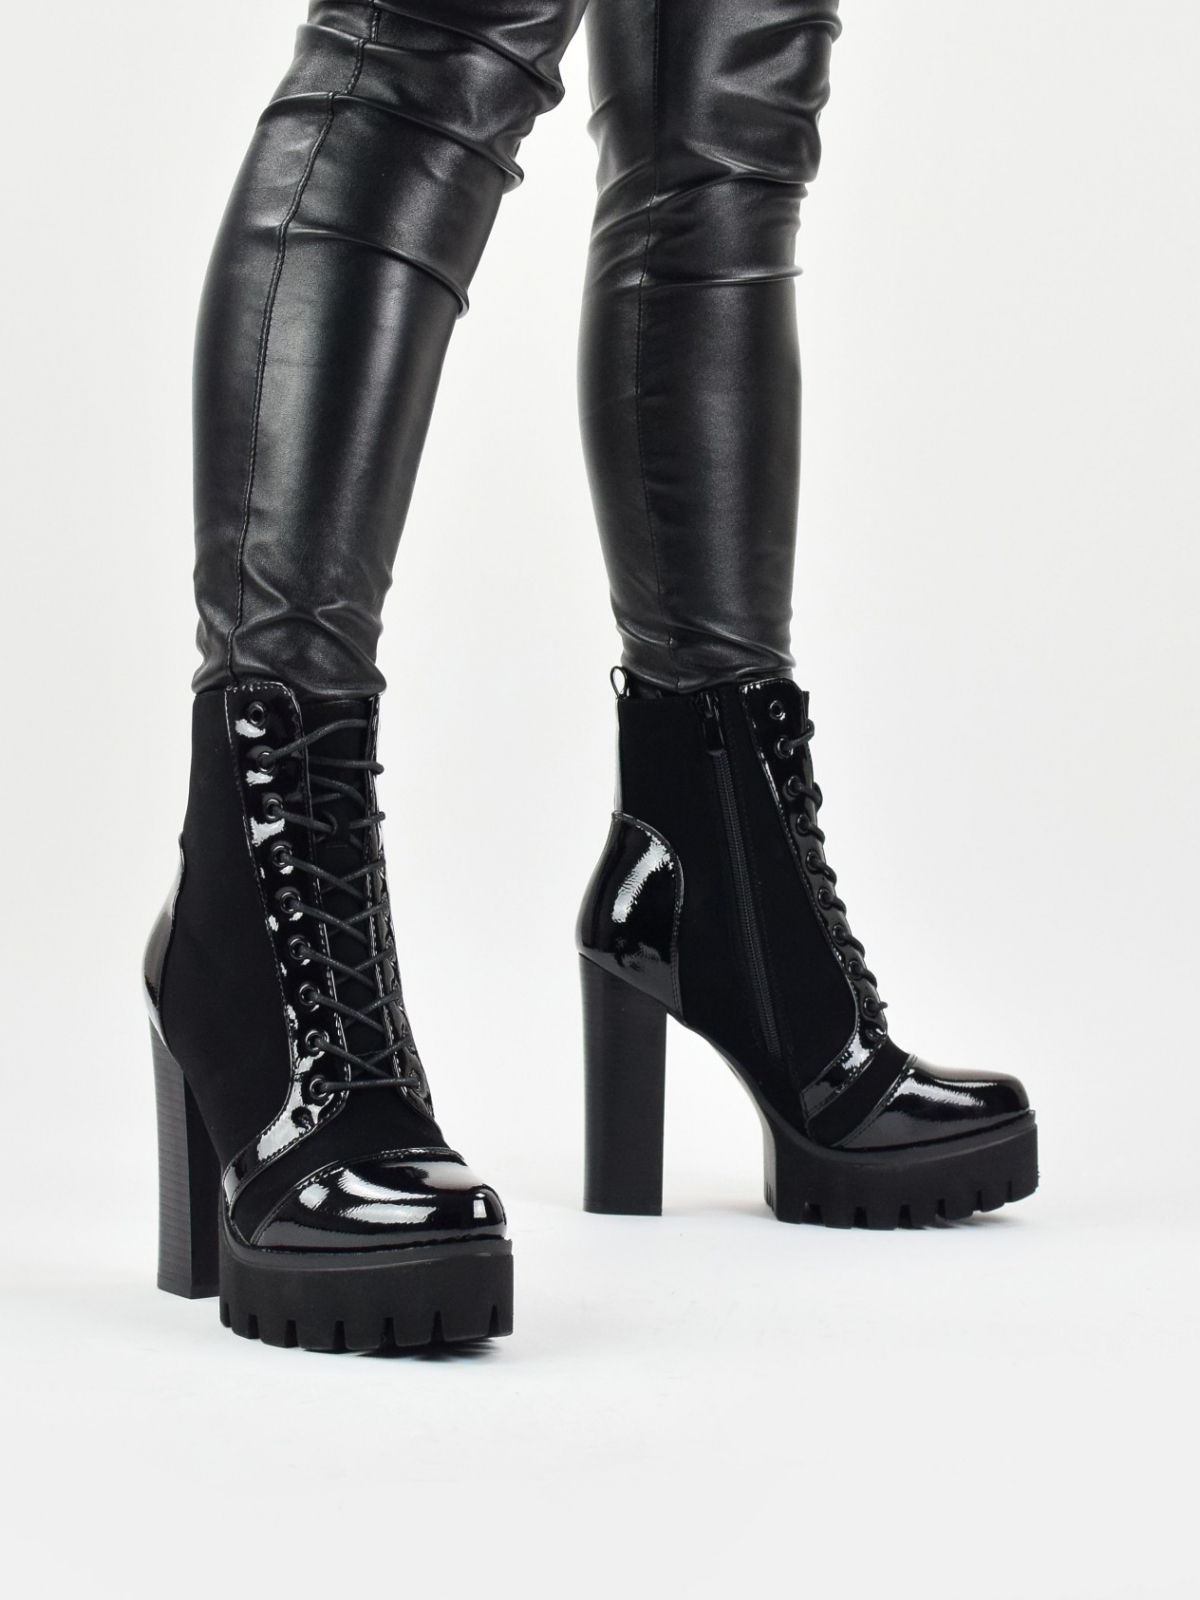 High heeled lace up platform boots in black